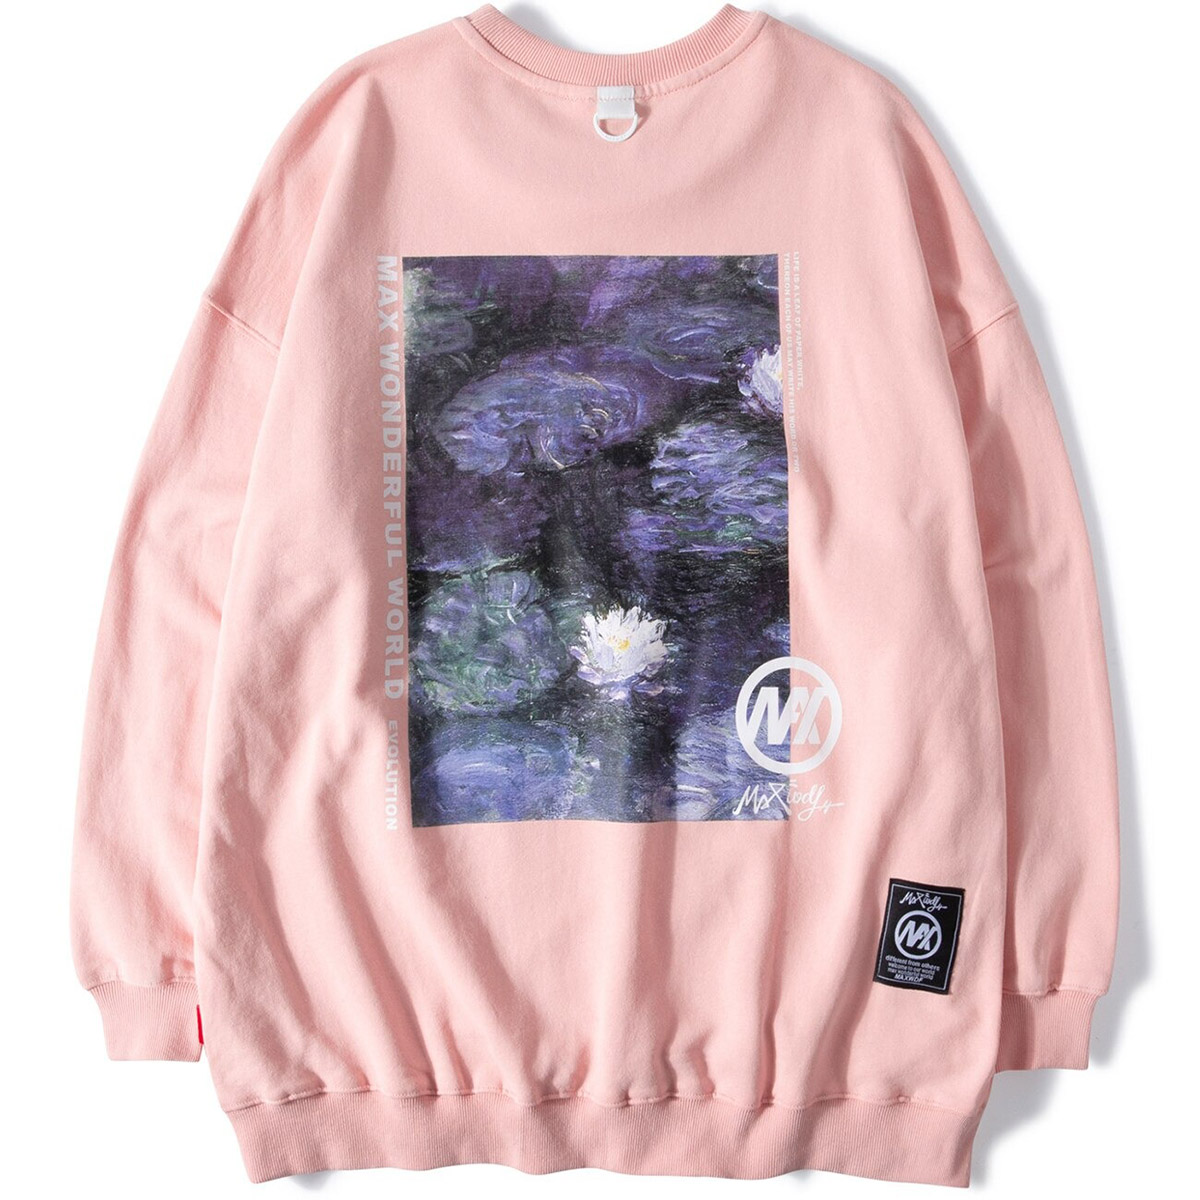 Loose Sweatshirt with Floral Print / Fashion Unisex Long Sleeve Cotton Pullovers - HARD'N'HEAVY